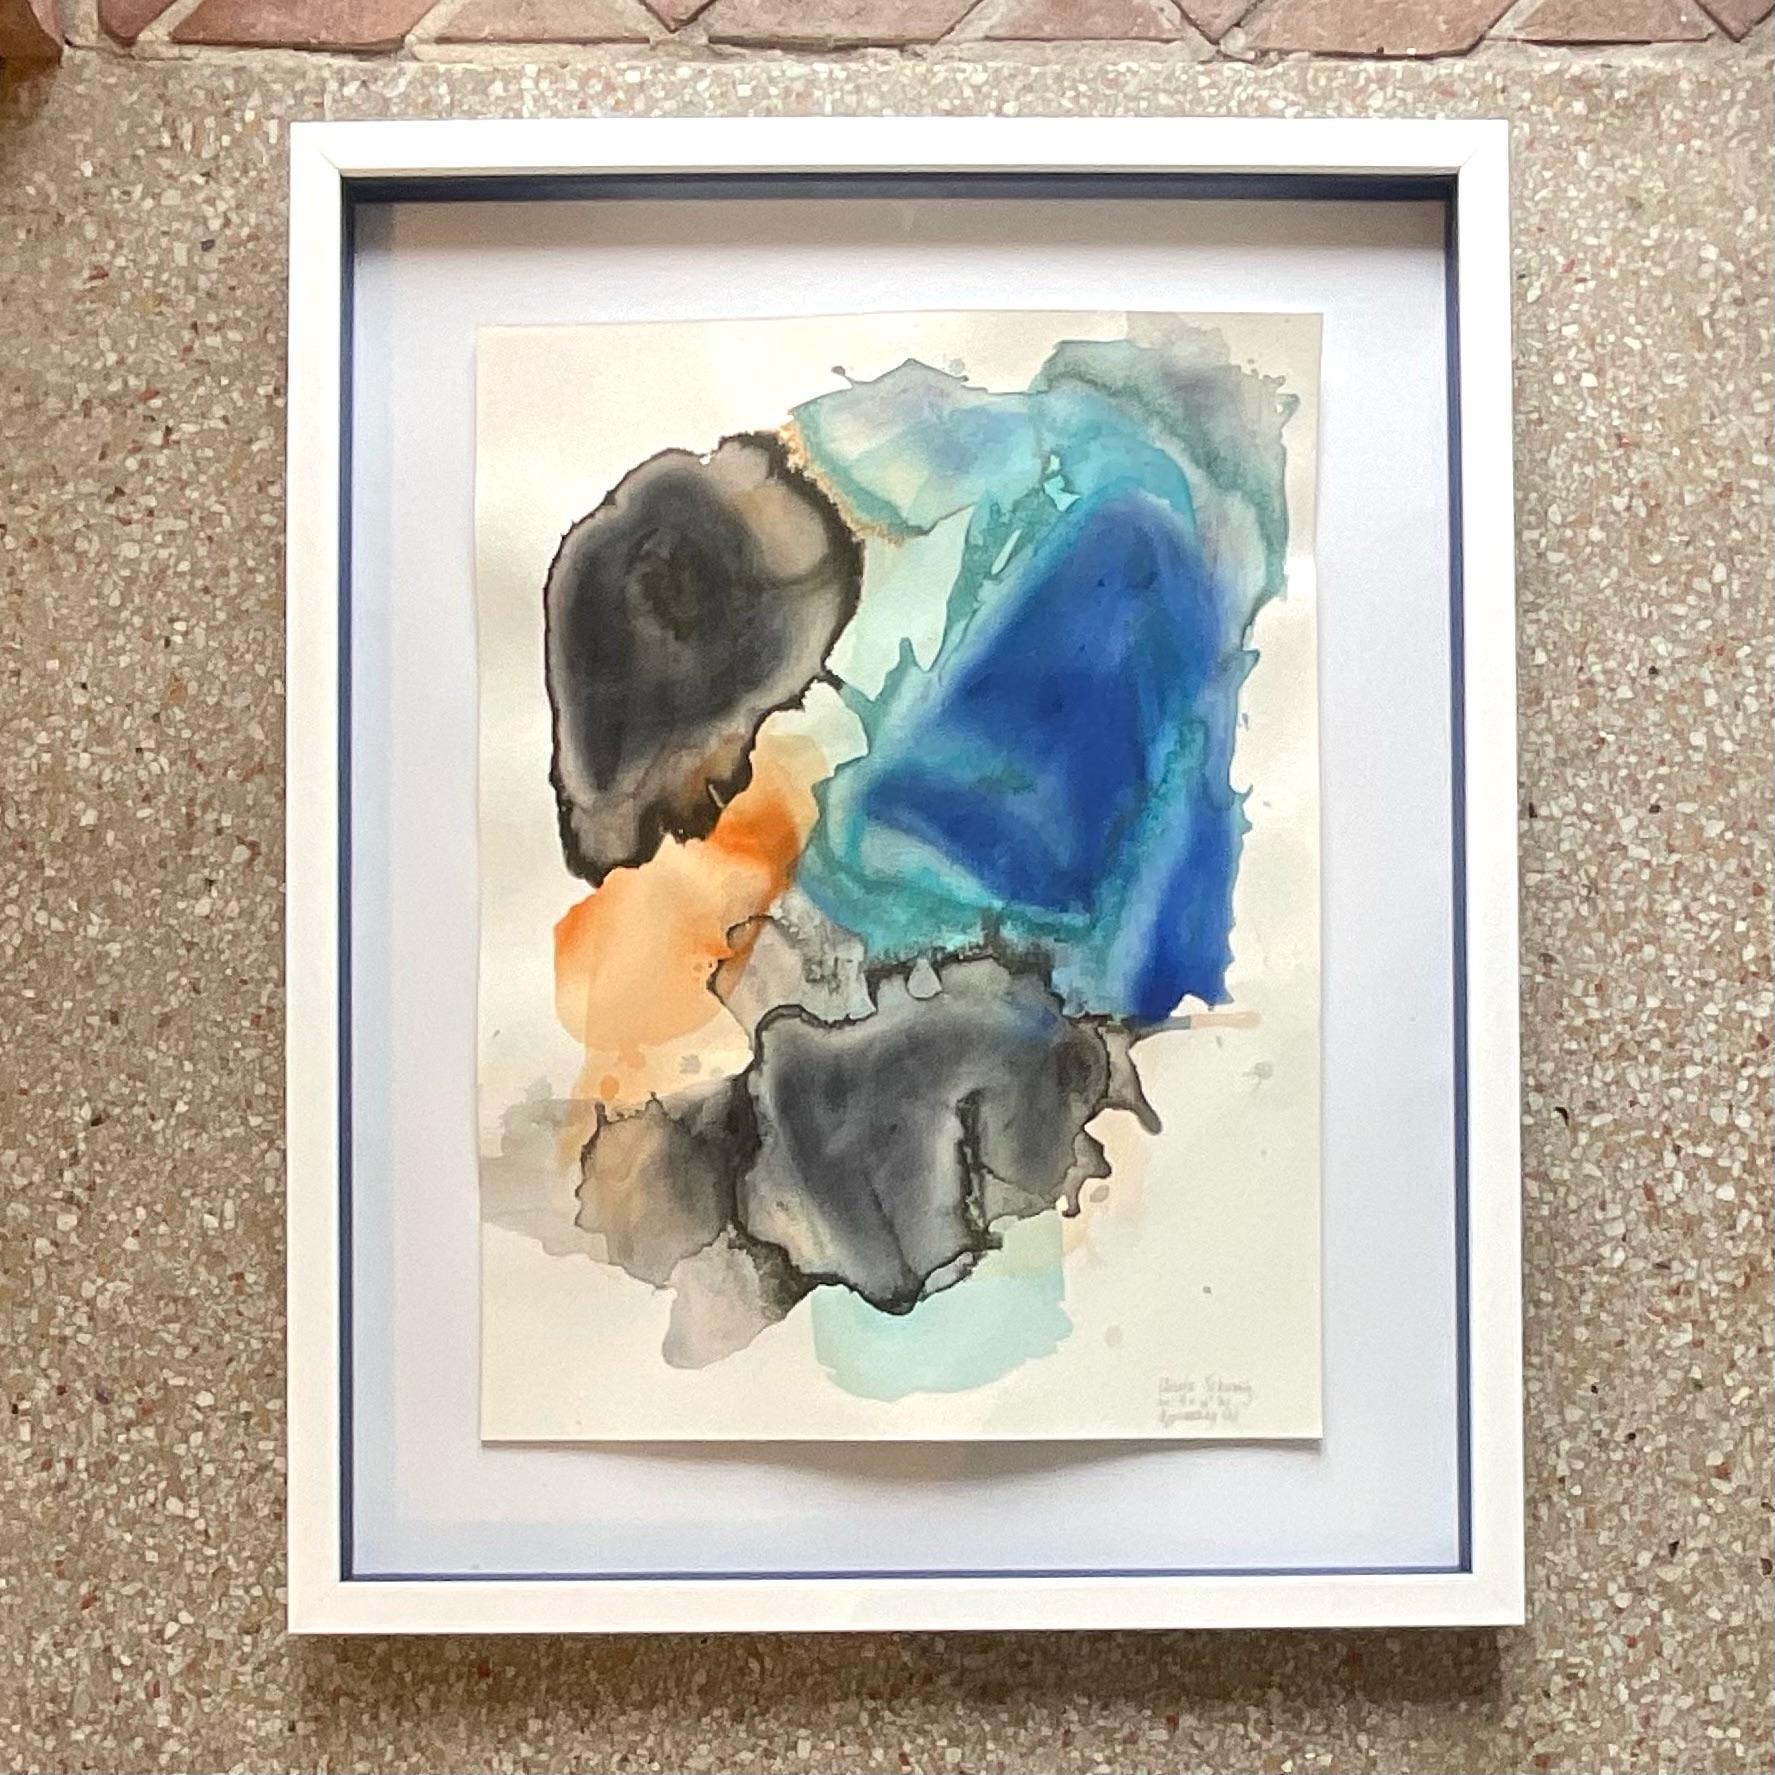 Vintage watercolor on paper artwork. This incredible block abstract is set inside a layered shadow box with a complimentary navy interior border and sleek white frame. This is one of a set of 2, the other is also available. Signed and titled by the